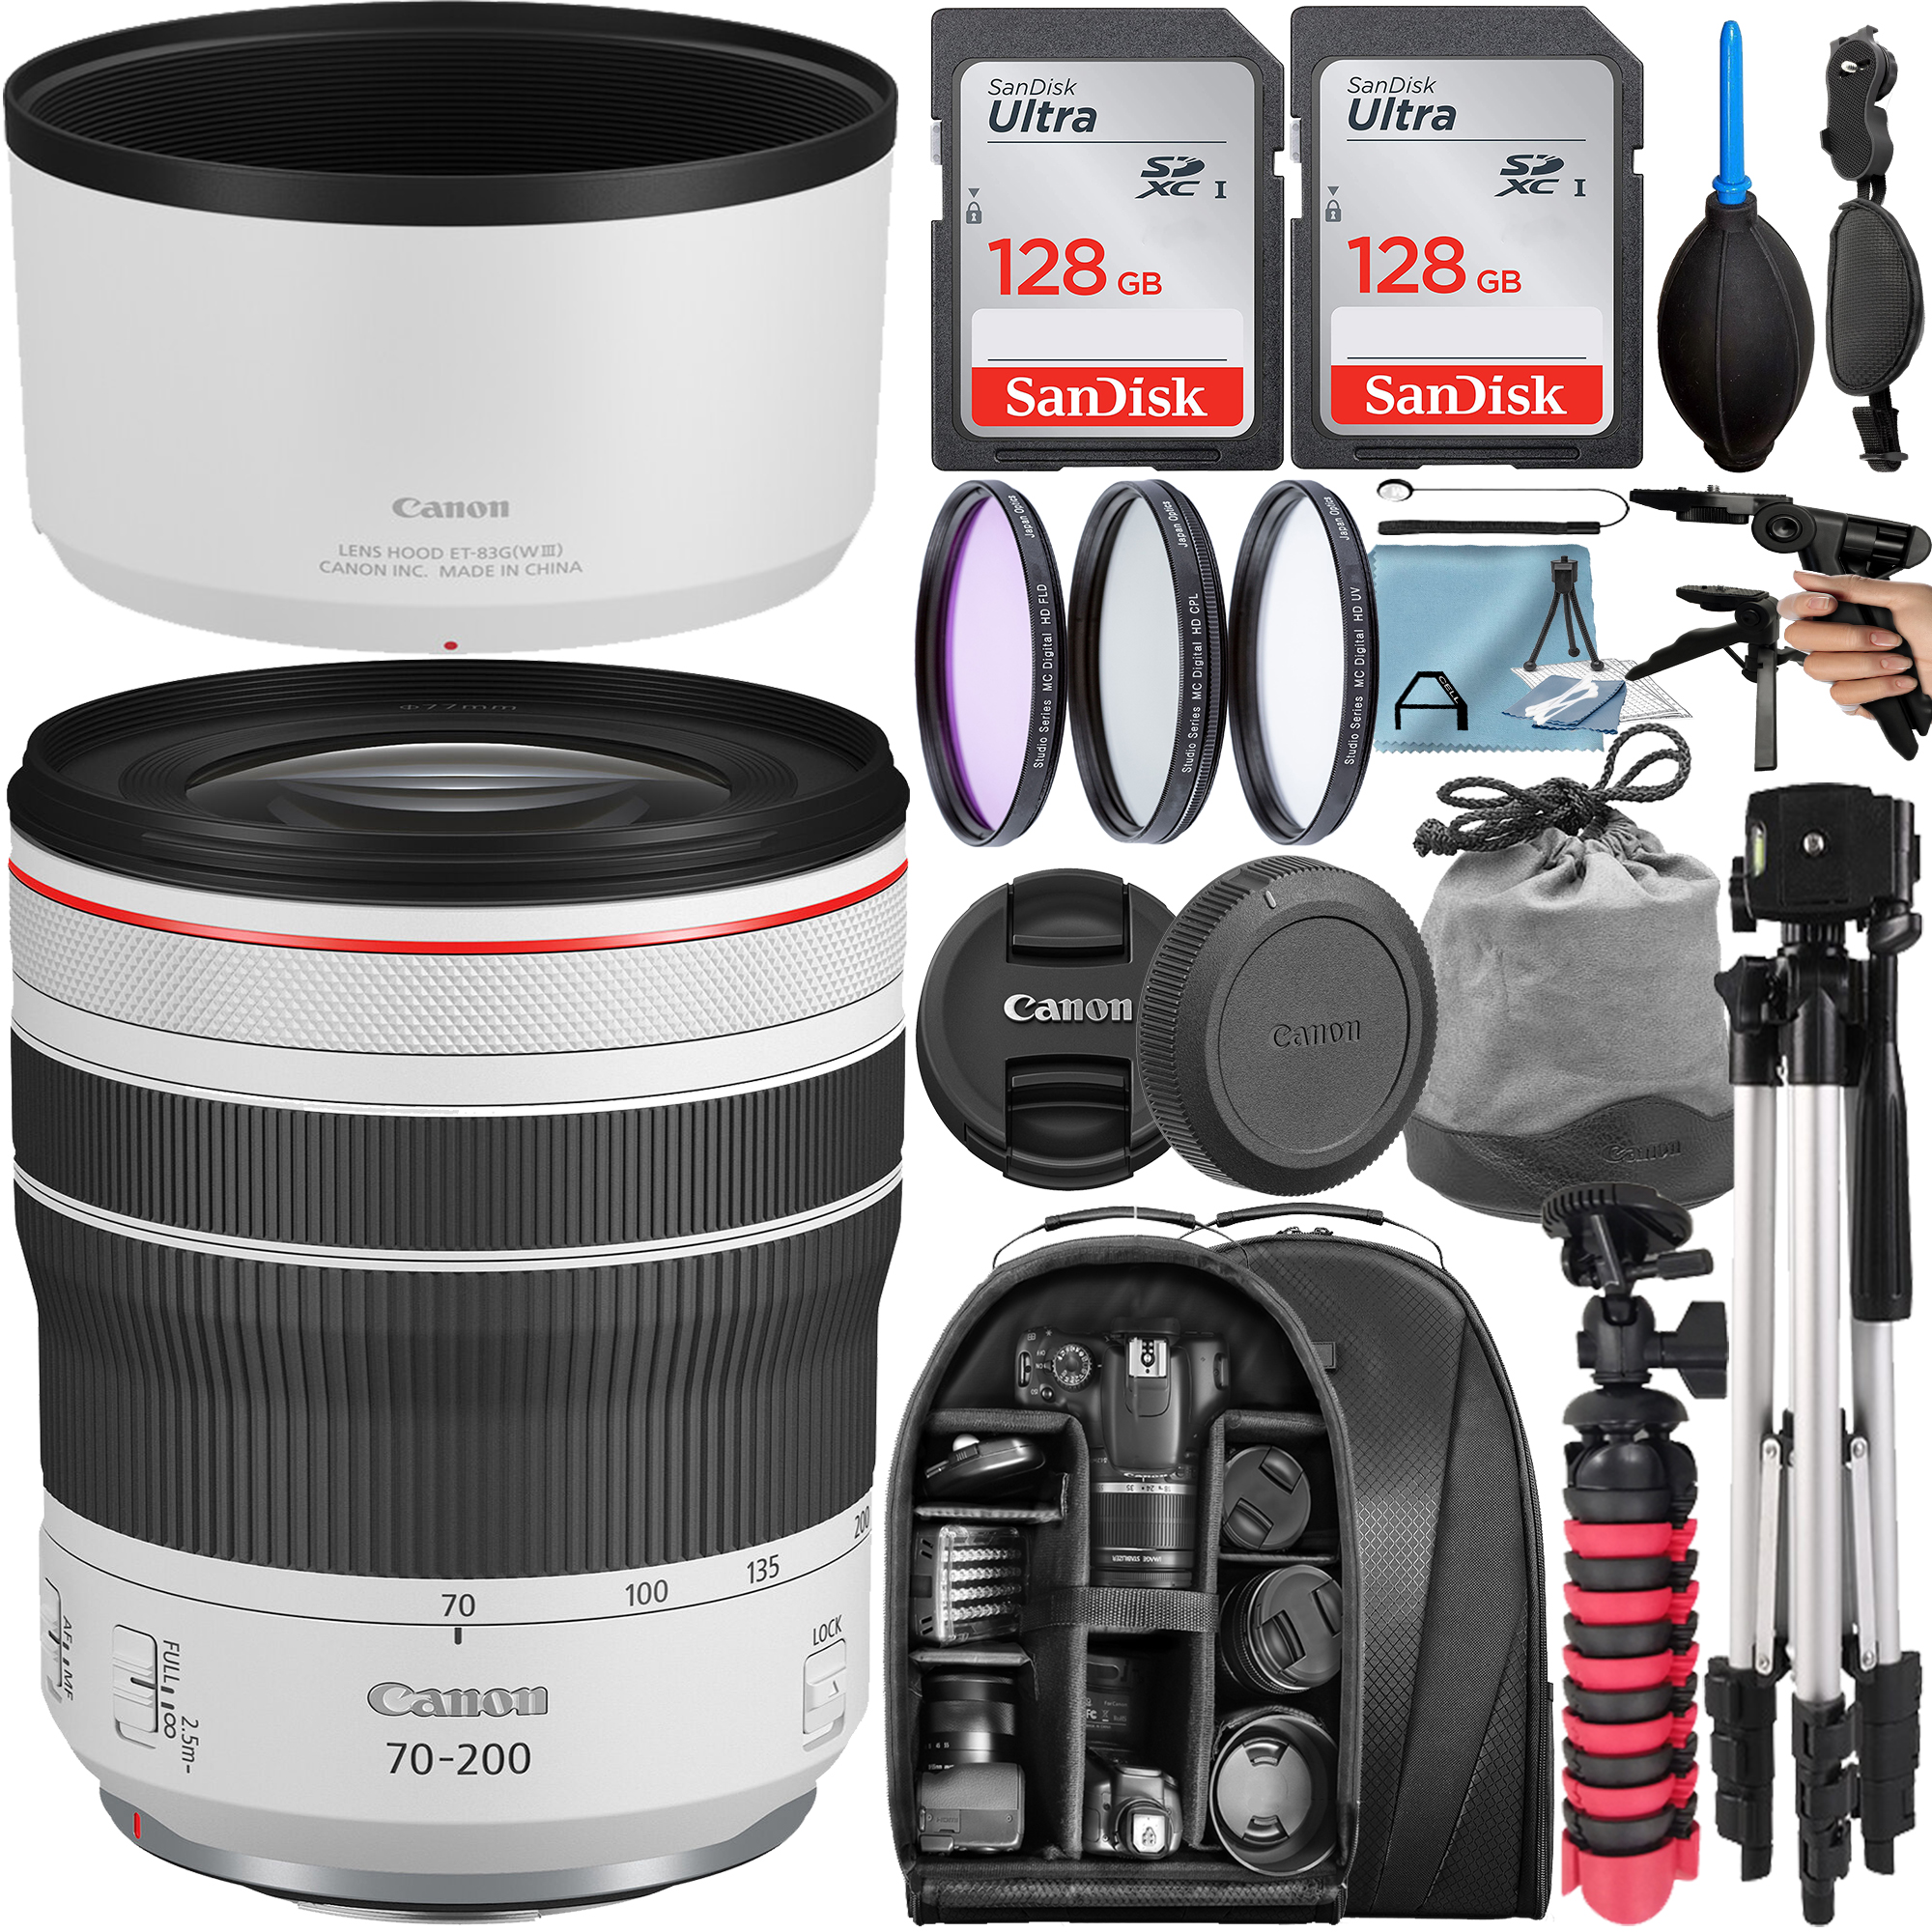 Canon RF 70-200mm F/4L IS USM Telephoto Zoom Lens with 2 Pack 128GB SanDisk Memory Card + Tripod + Backpack + A-Cell Accessory Bundle